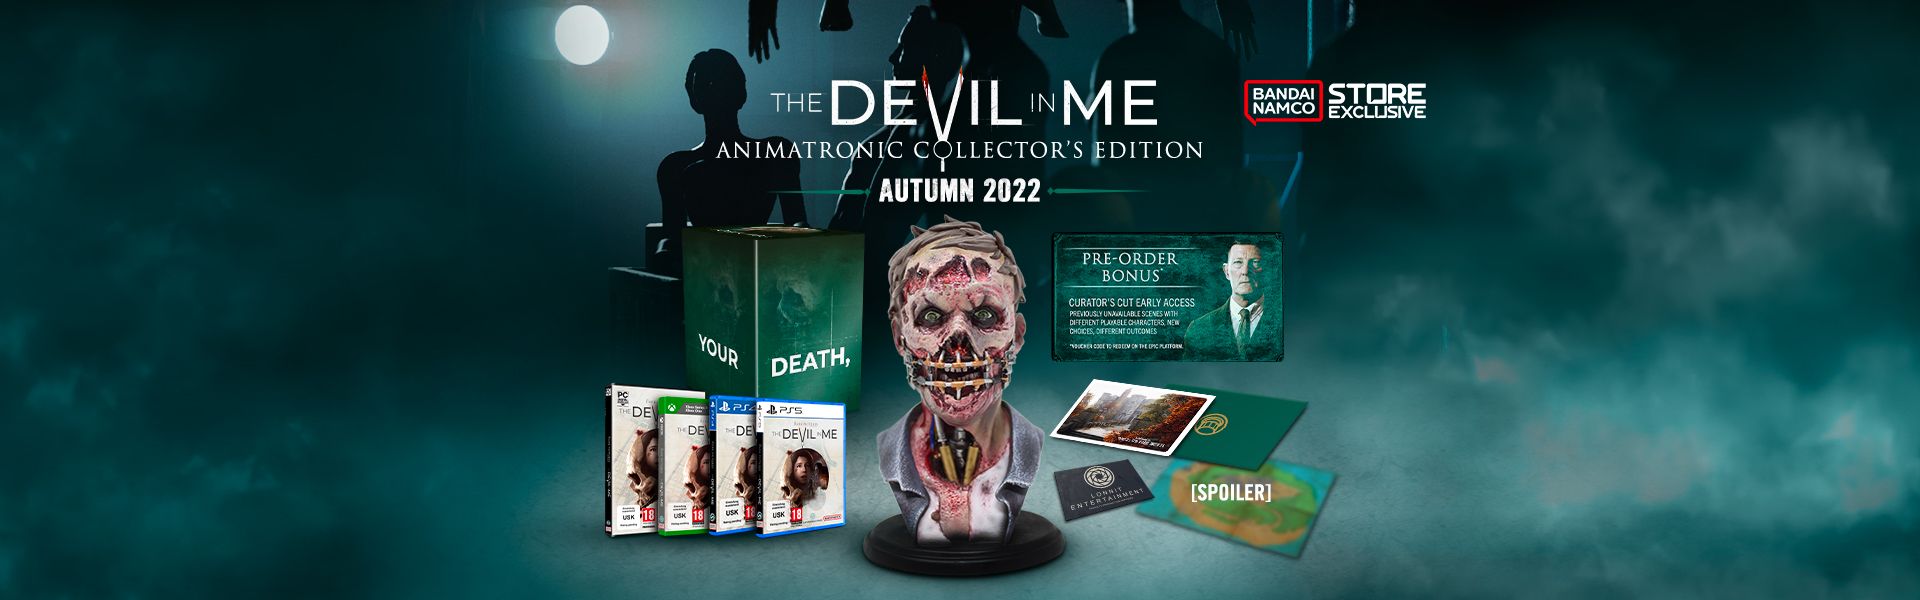 THE DARK PICTURES: DEVIL IN ME - Animatronic collector’s edition